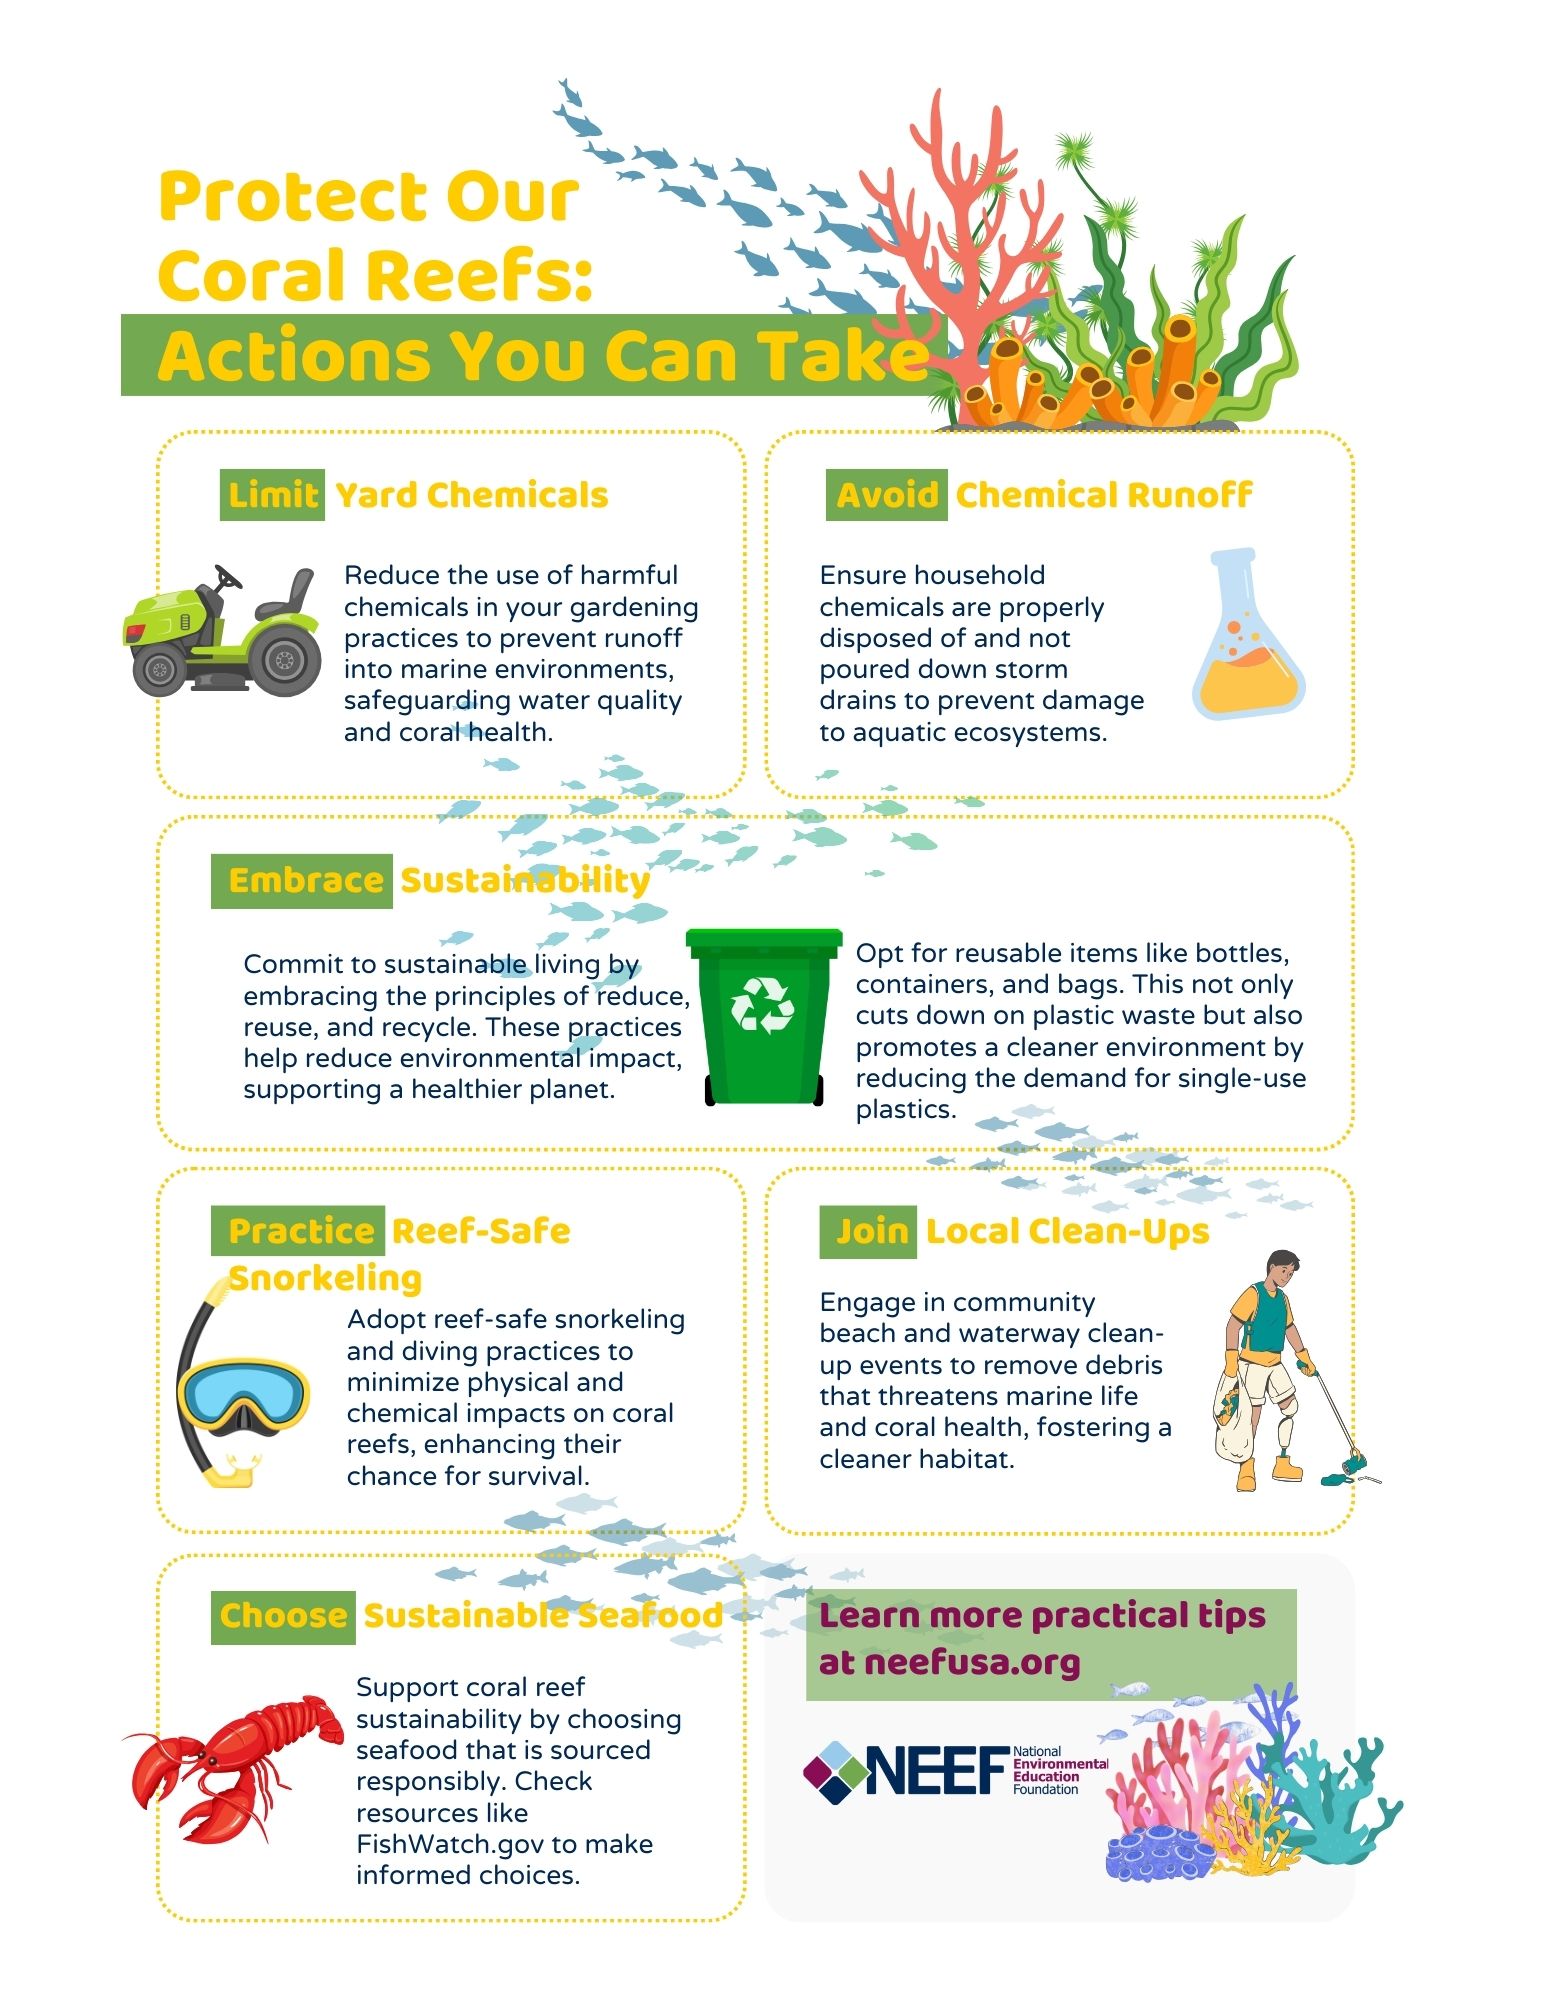 An infographic illustrating the many different ways you can take action to protect coral reefs.